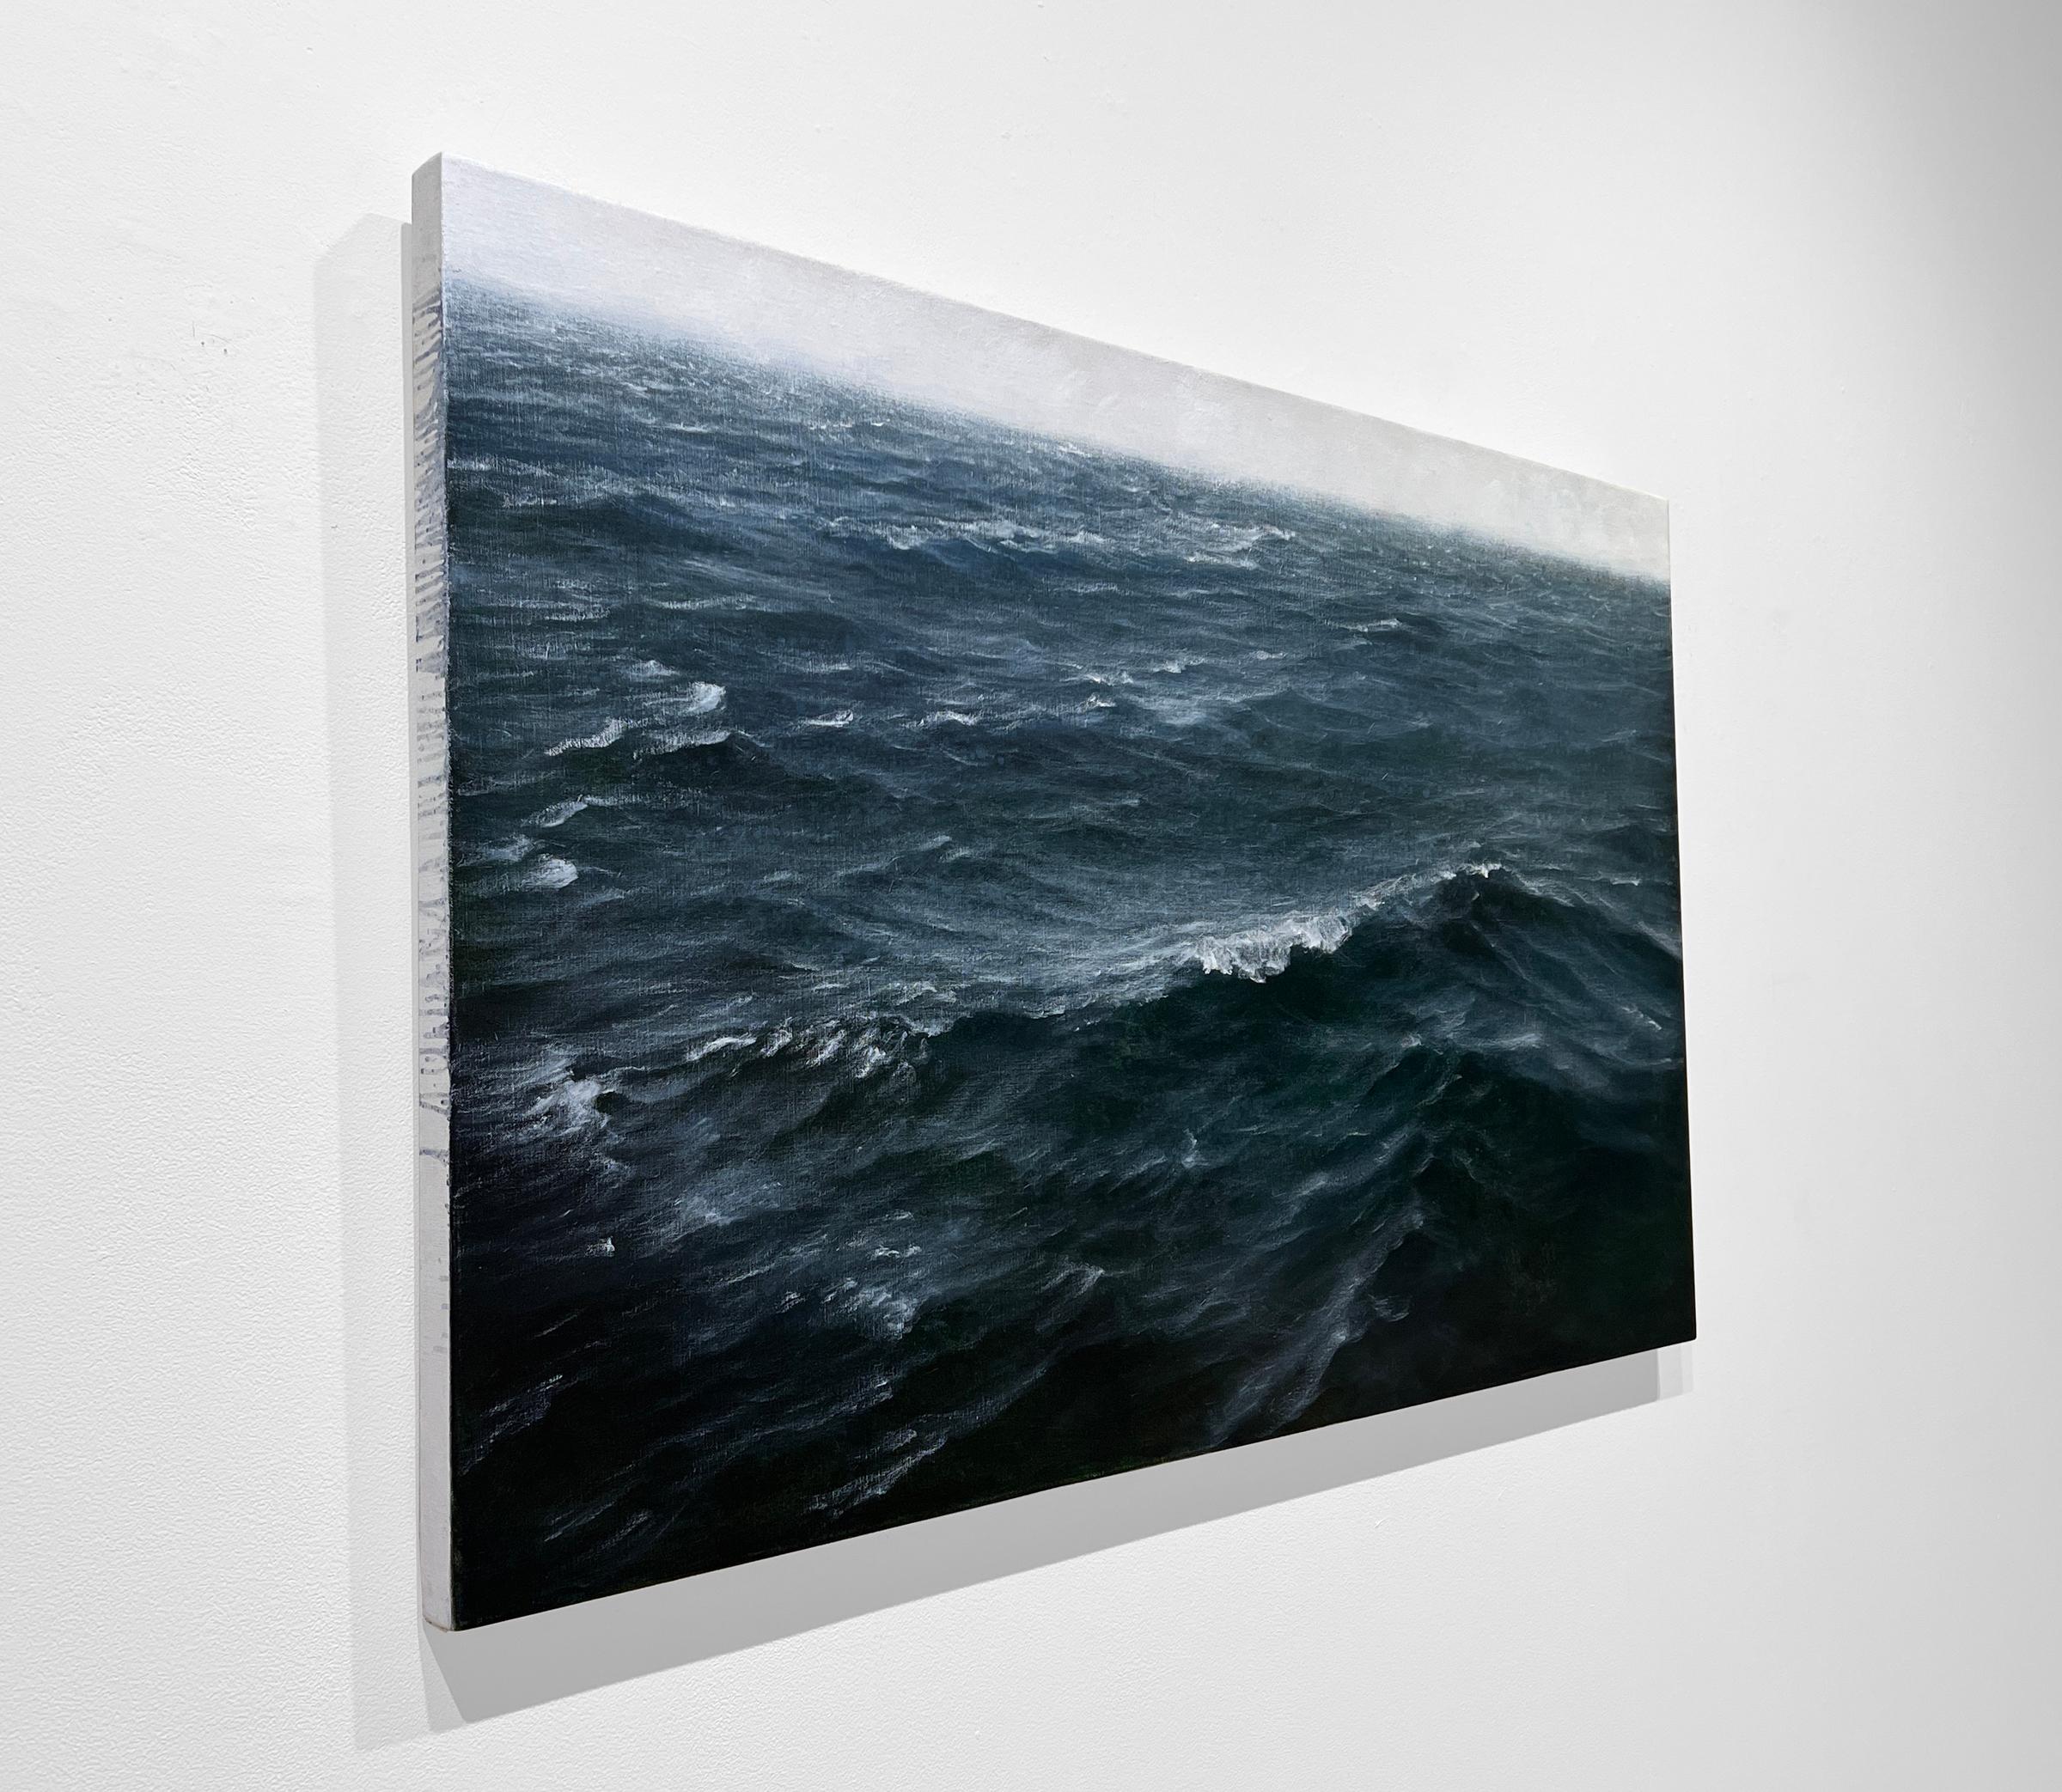 ATLANTIC SWELL 13, dark ocean, waves, stormy, photorealism, water, waterscape - Contemporary Painting by Lisa Lebofsky